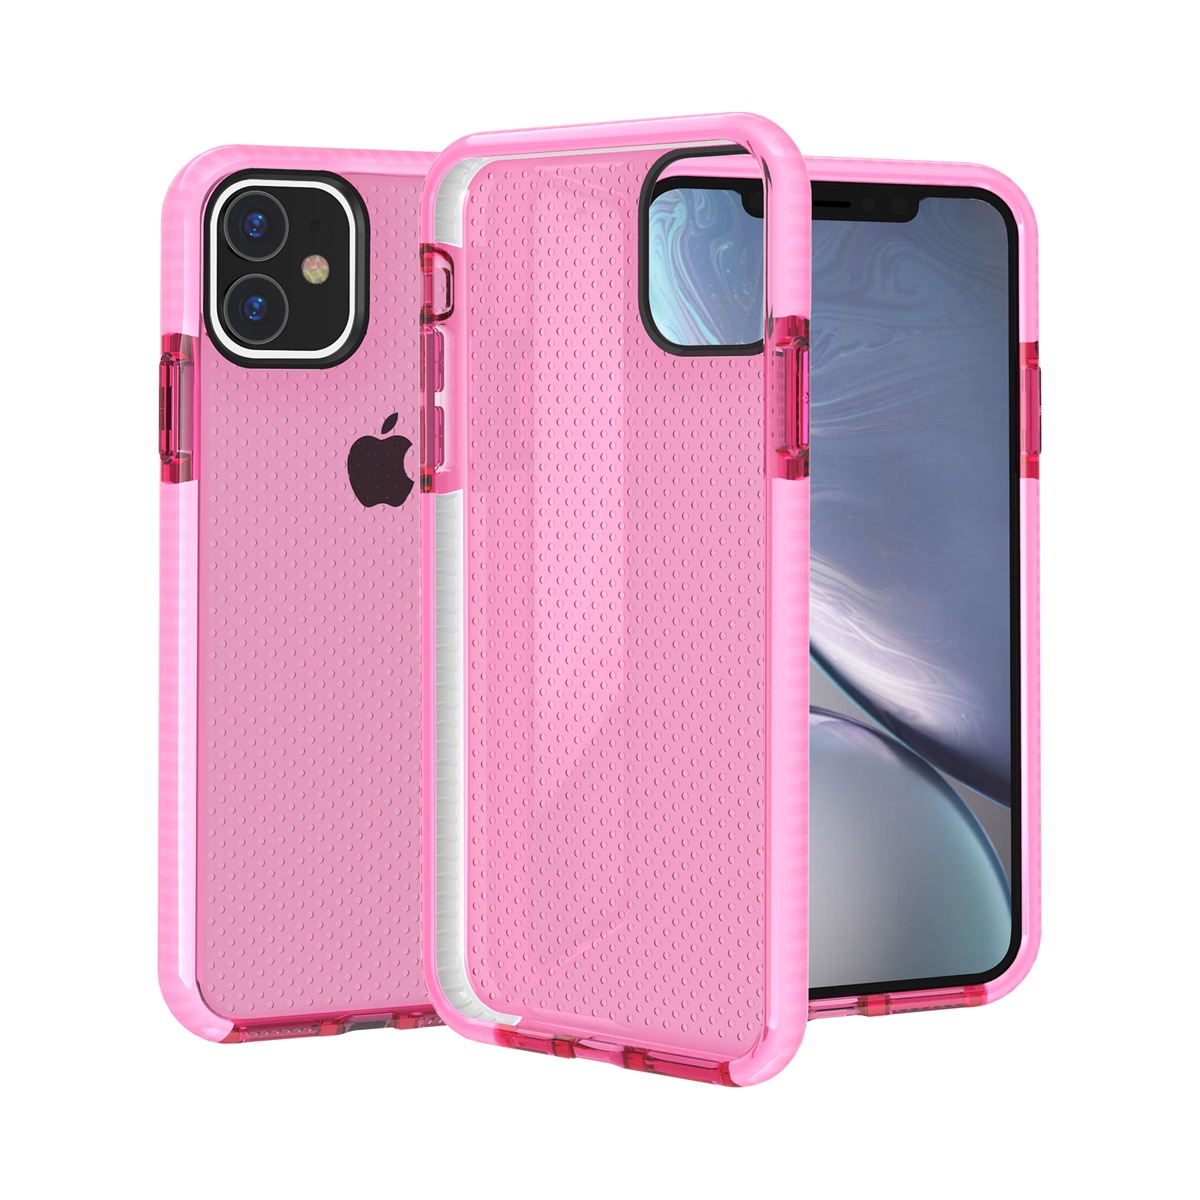 iPHONE 11 Pro (5.8in) Mesh Armor Hybrid Case (Hot Pink)